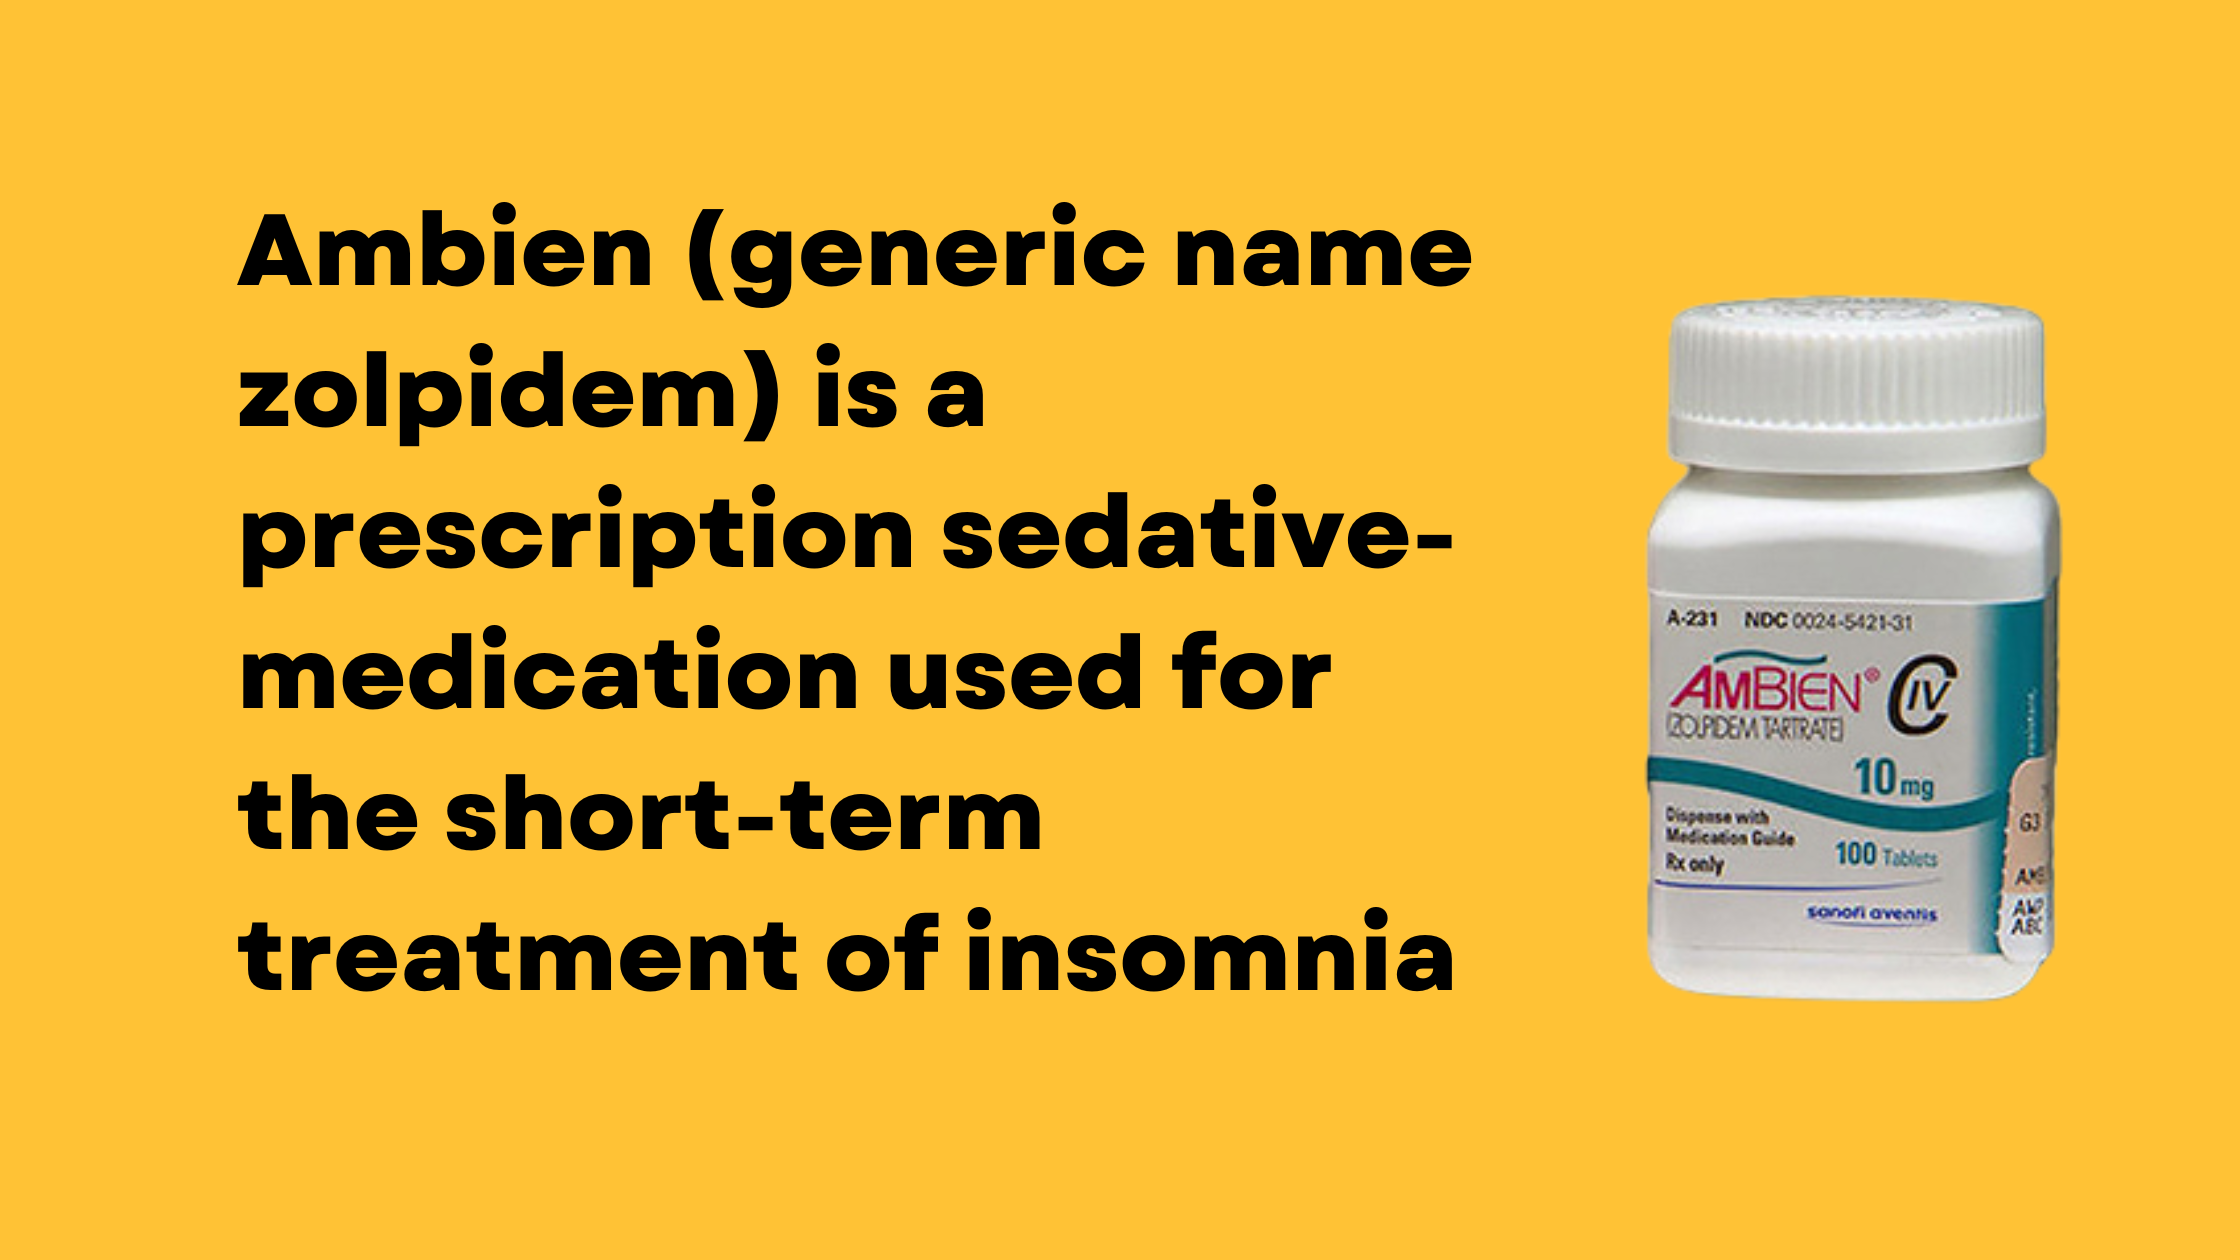 What is Ambien